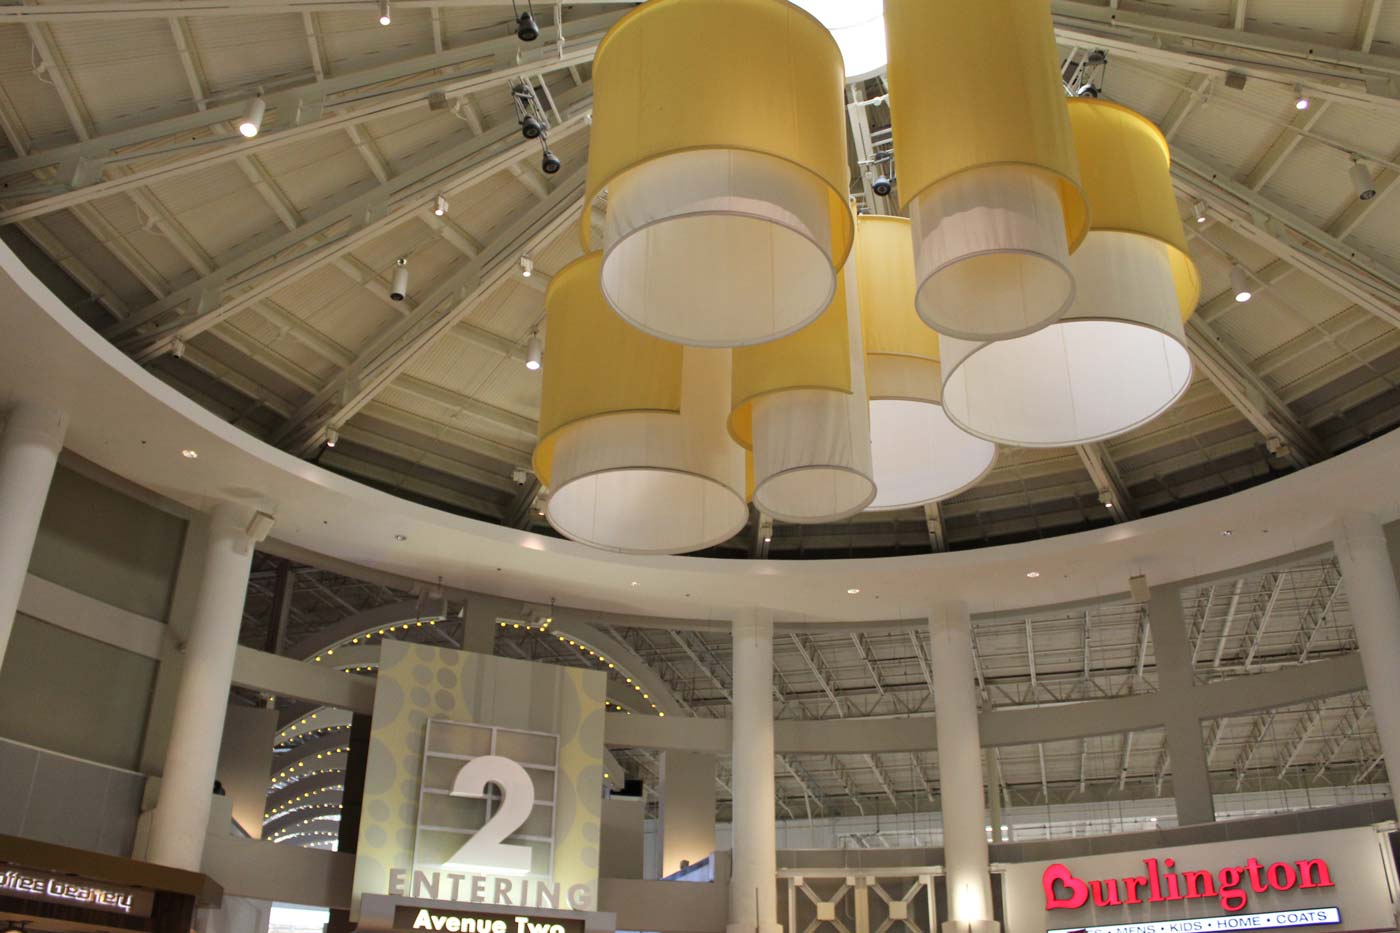 Eight new stores open at Sawgrass Mills outlet center